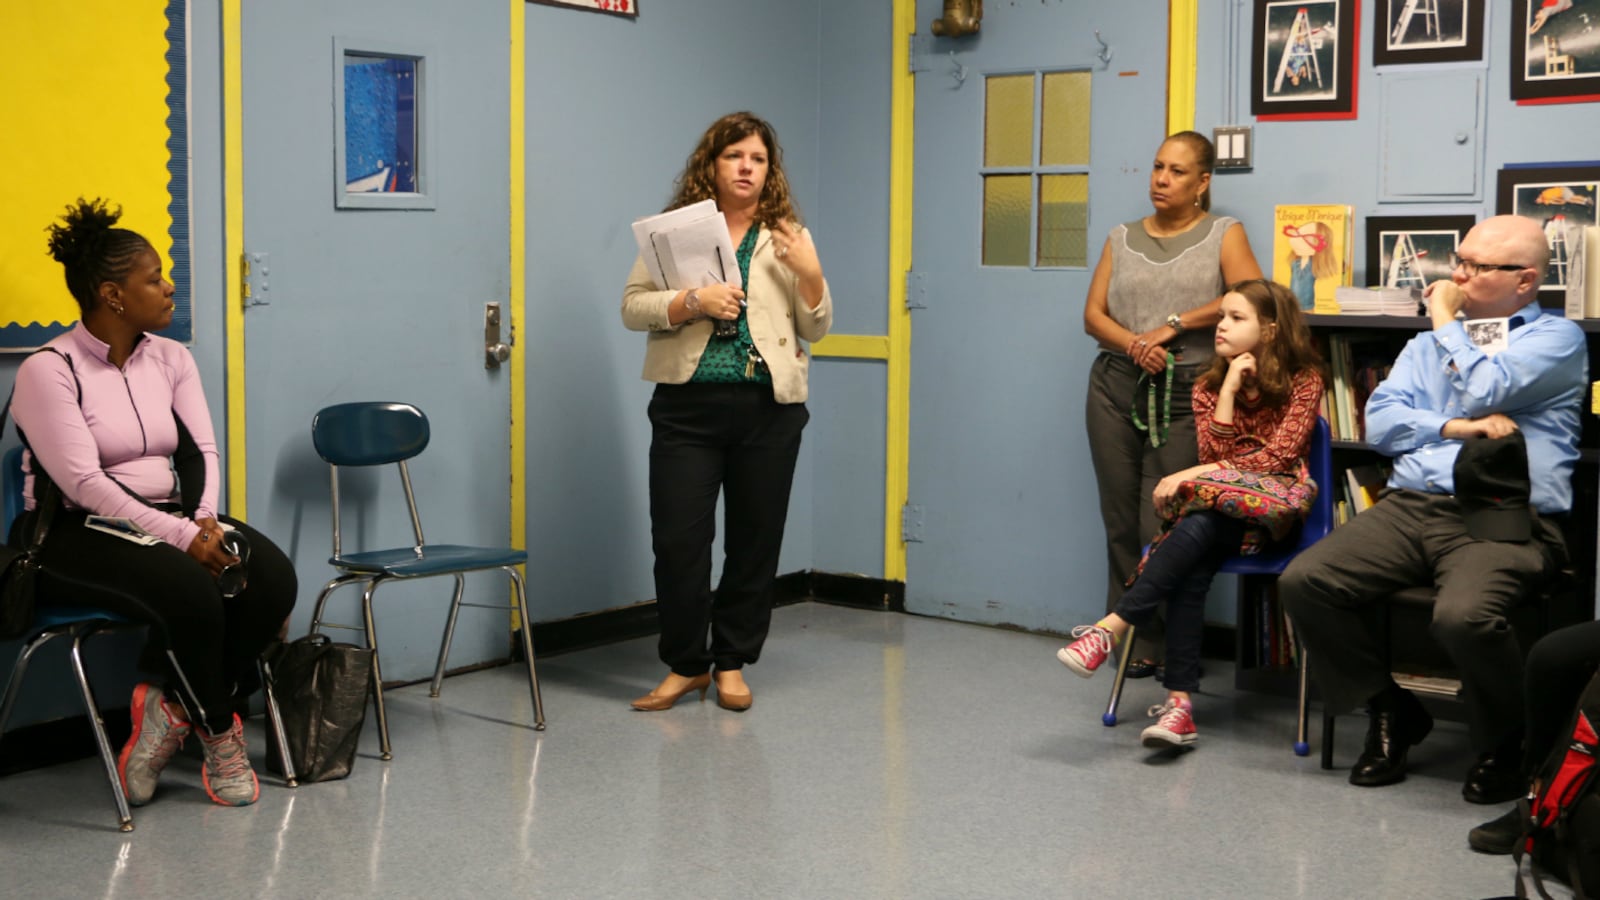 A meeting at P.S. 191, an elementary school in Manhattan's District 3.